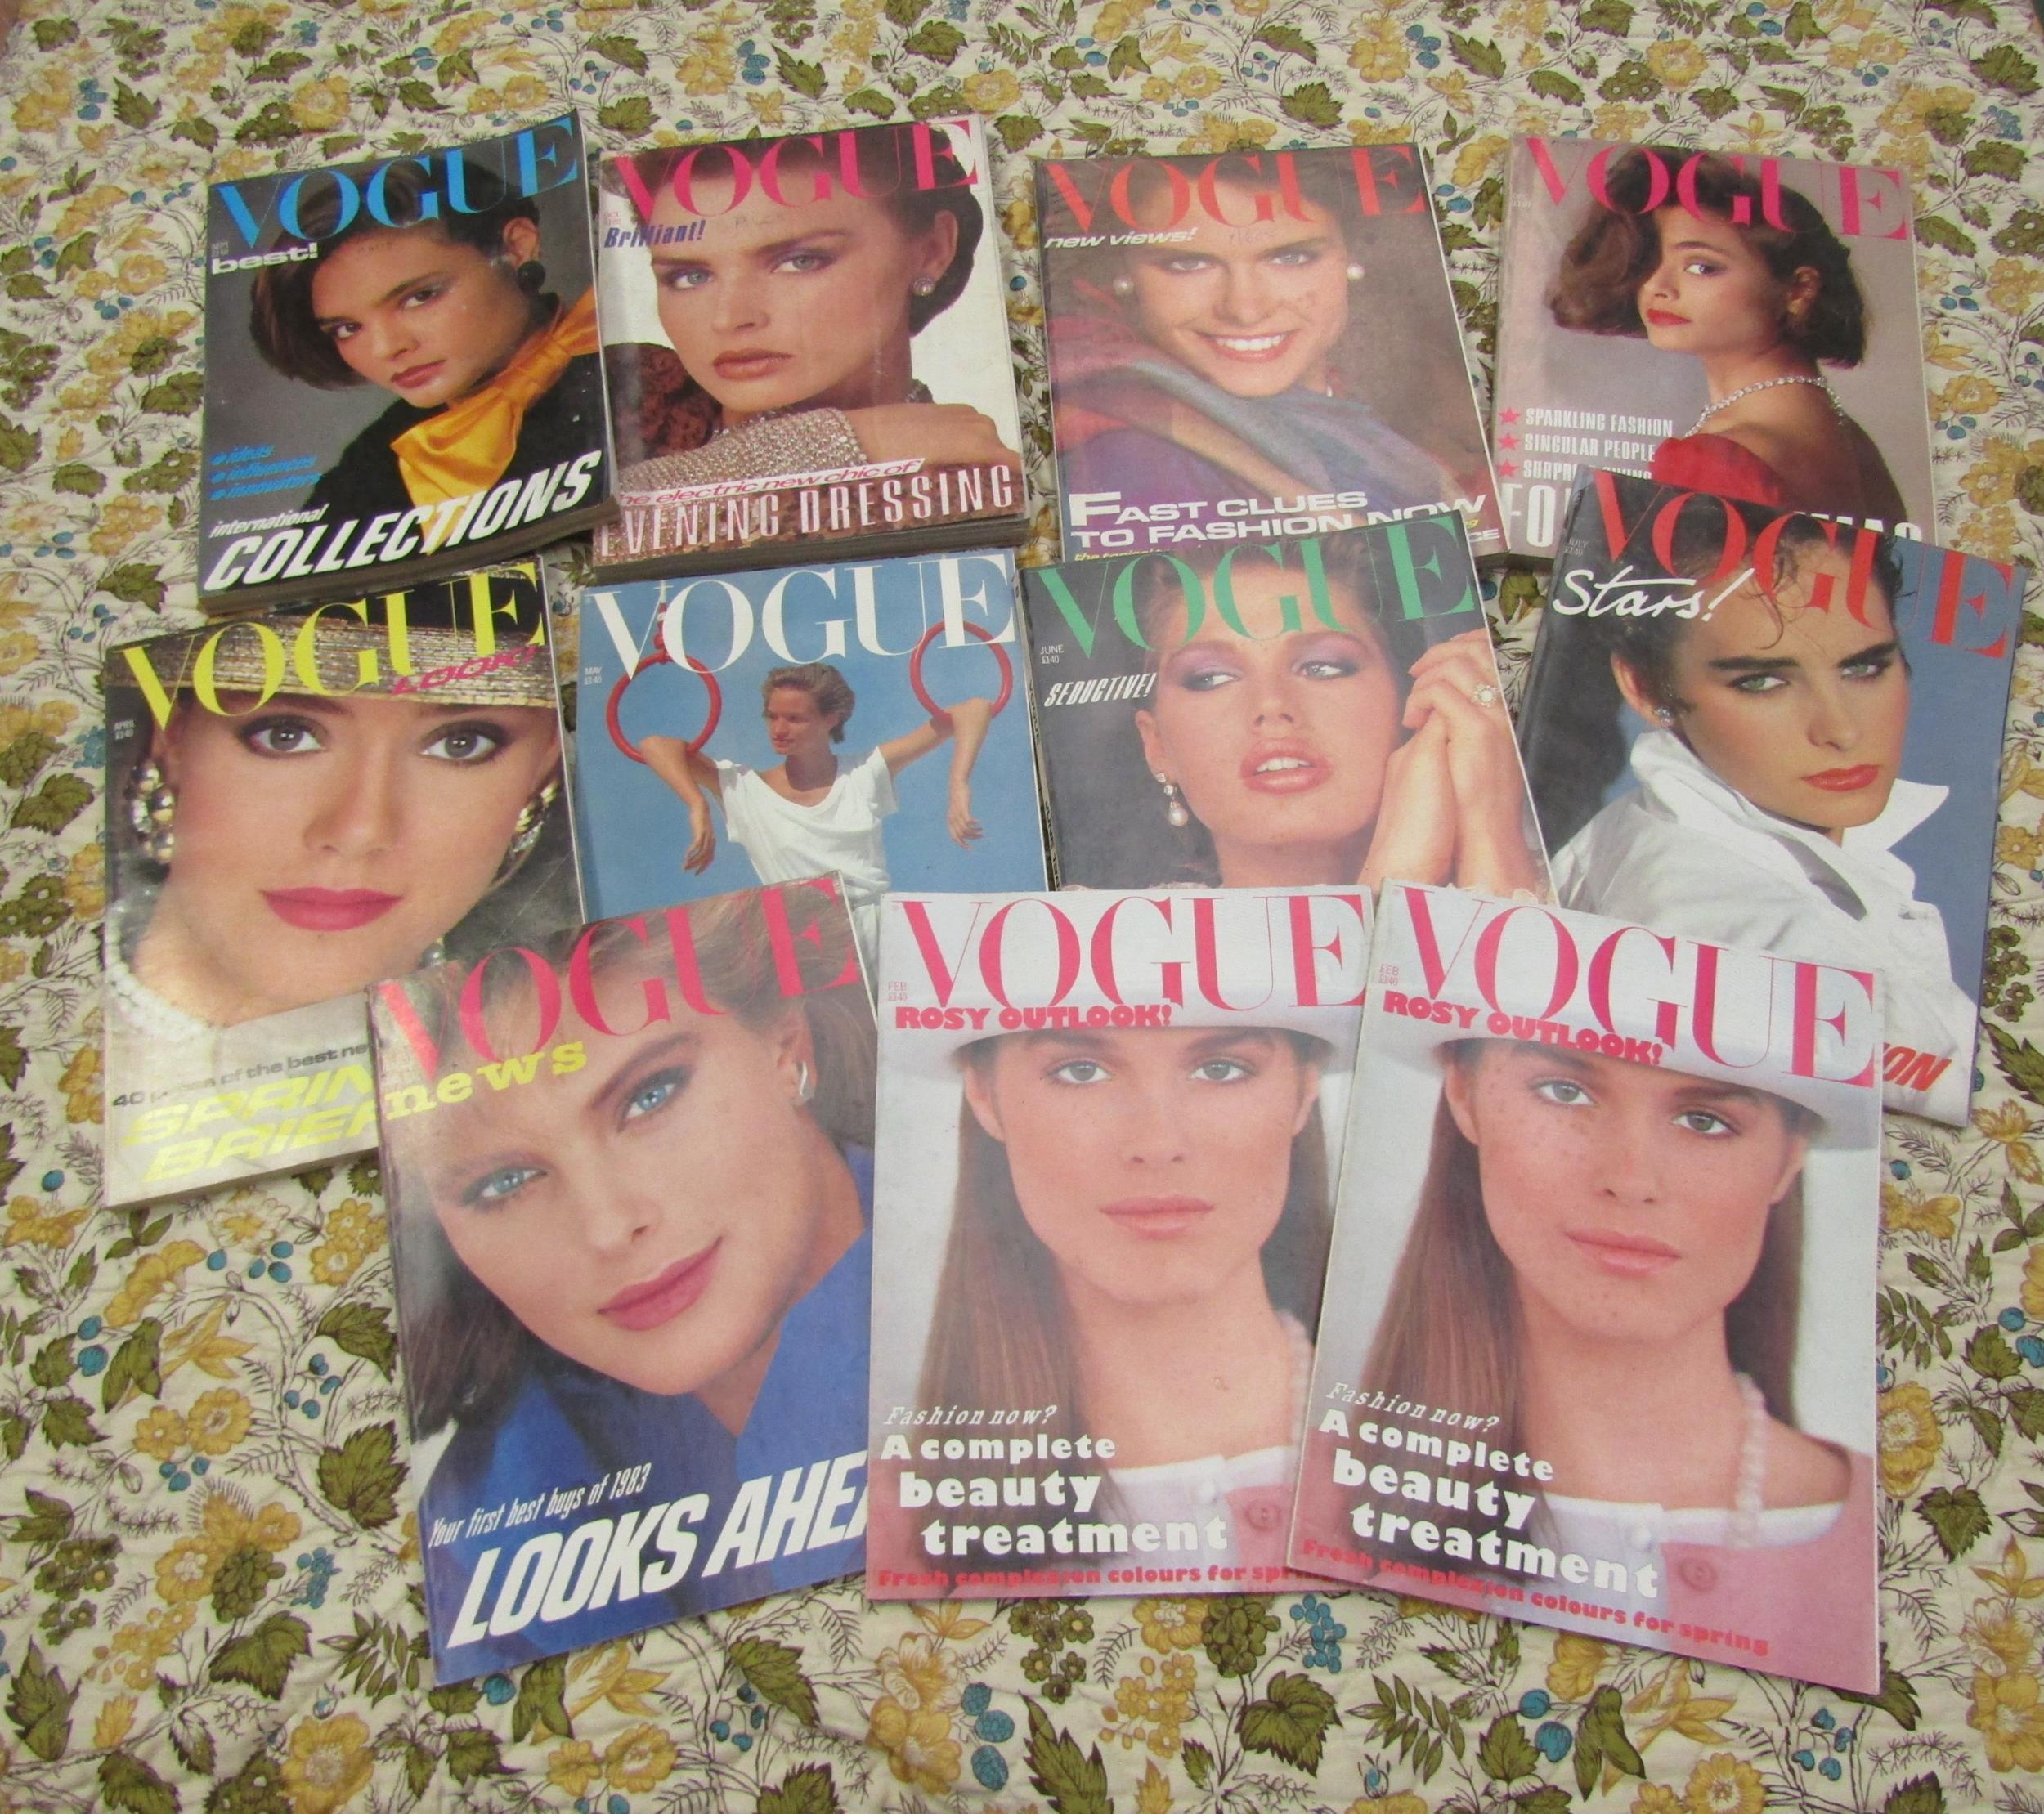 British Vogue magazine 1980 - January (1), February (2), March 1st (3), March 15th (4), April 1st ( - Image 6 of 40